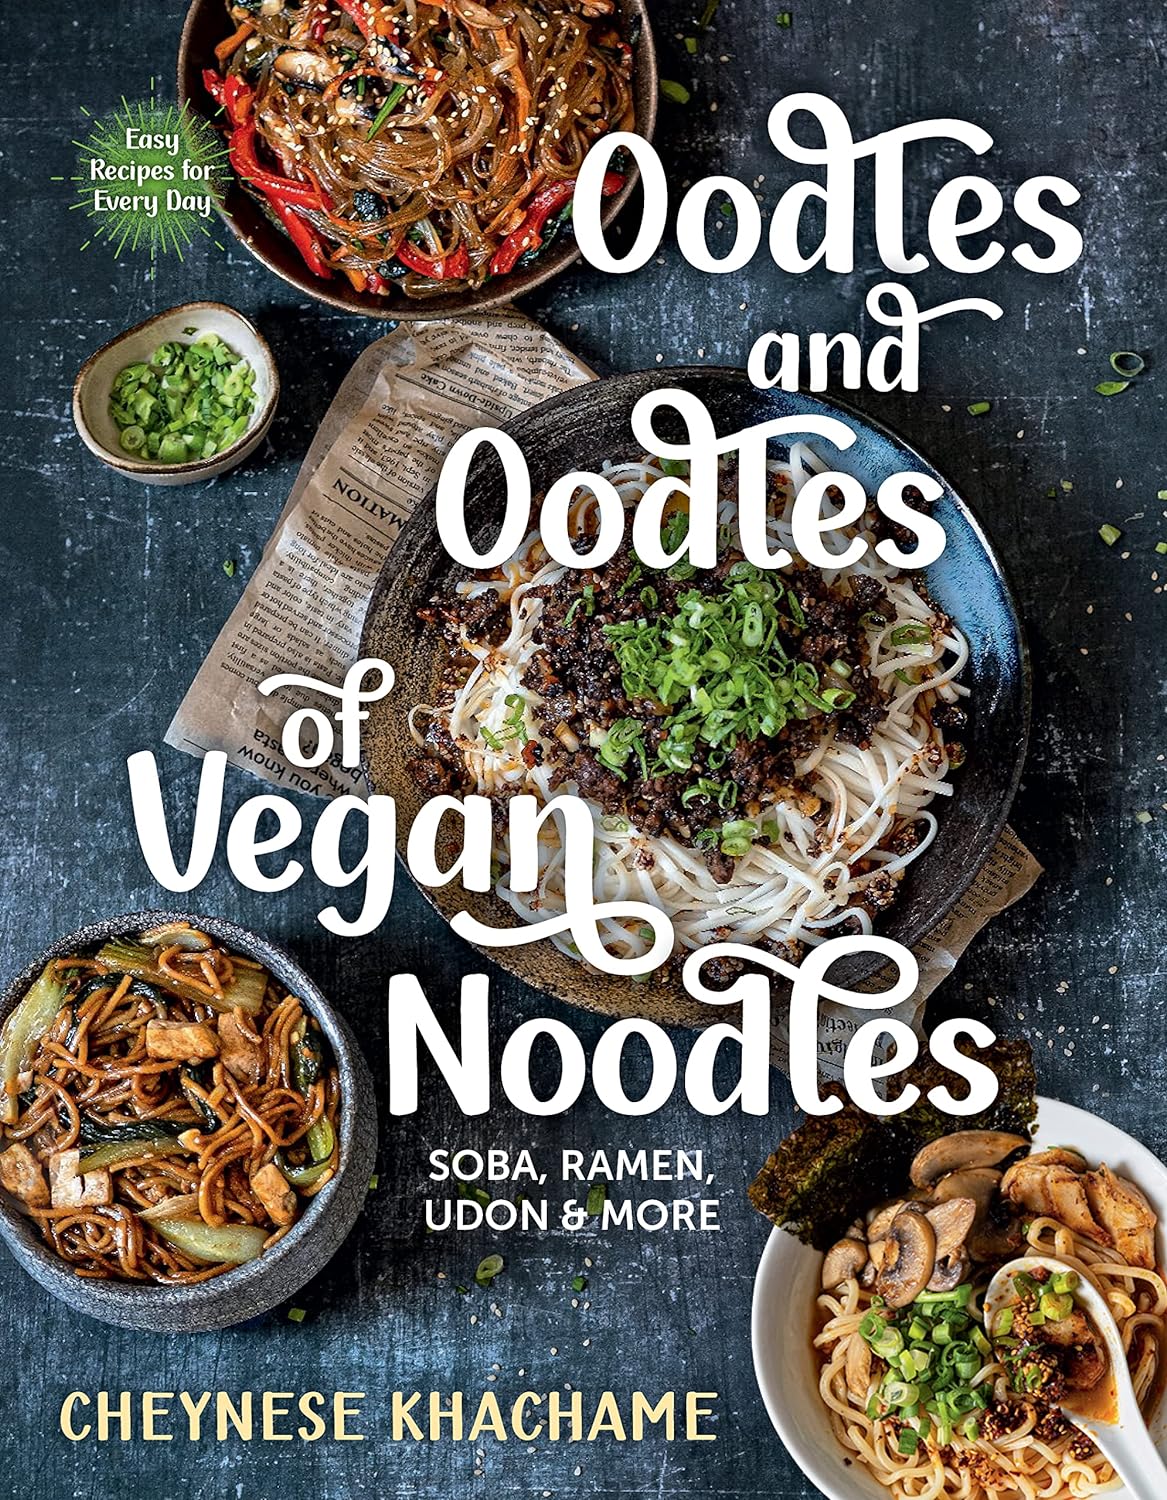 Oodles and Oodles of Vegan Noodles: Soba, Ramen, Udon & More―Easy Recipes for Every Day (Cheynese Khachame)